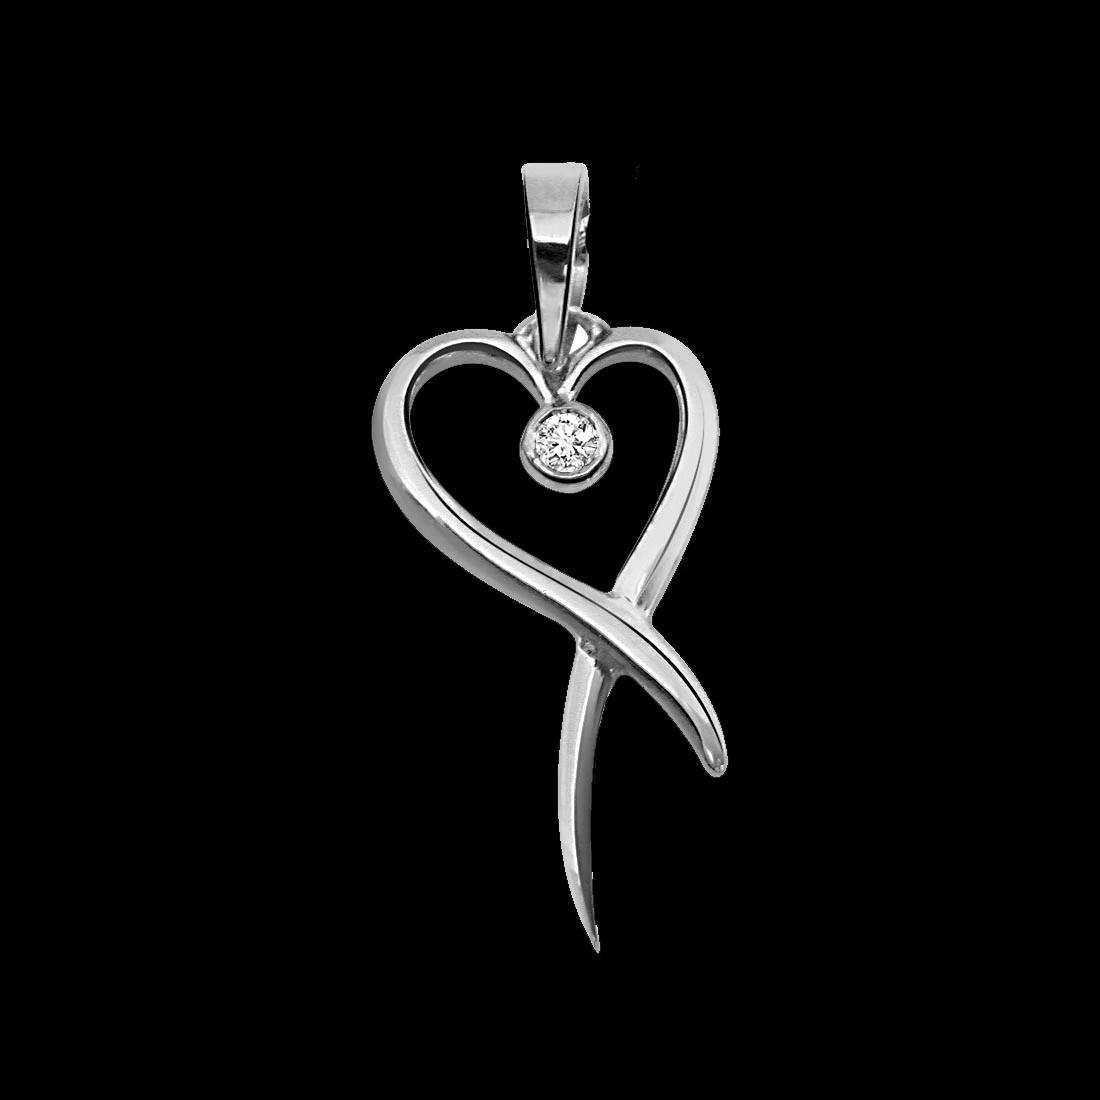 Holder of Love - Real Diamond & Sterling Silver Pendant with 18 IN Chain (SDP43)